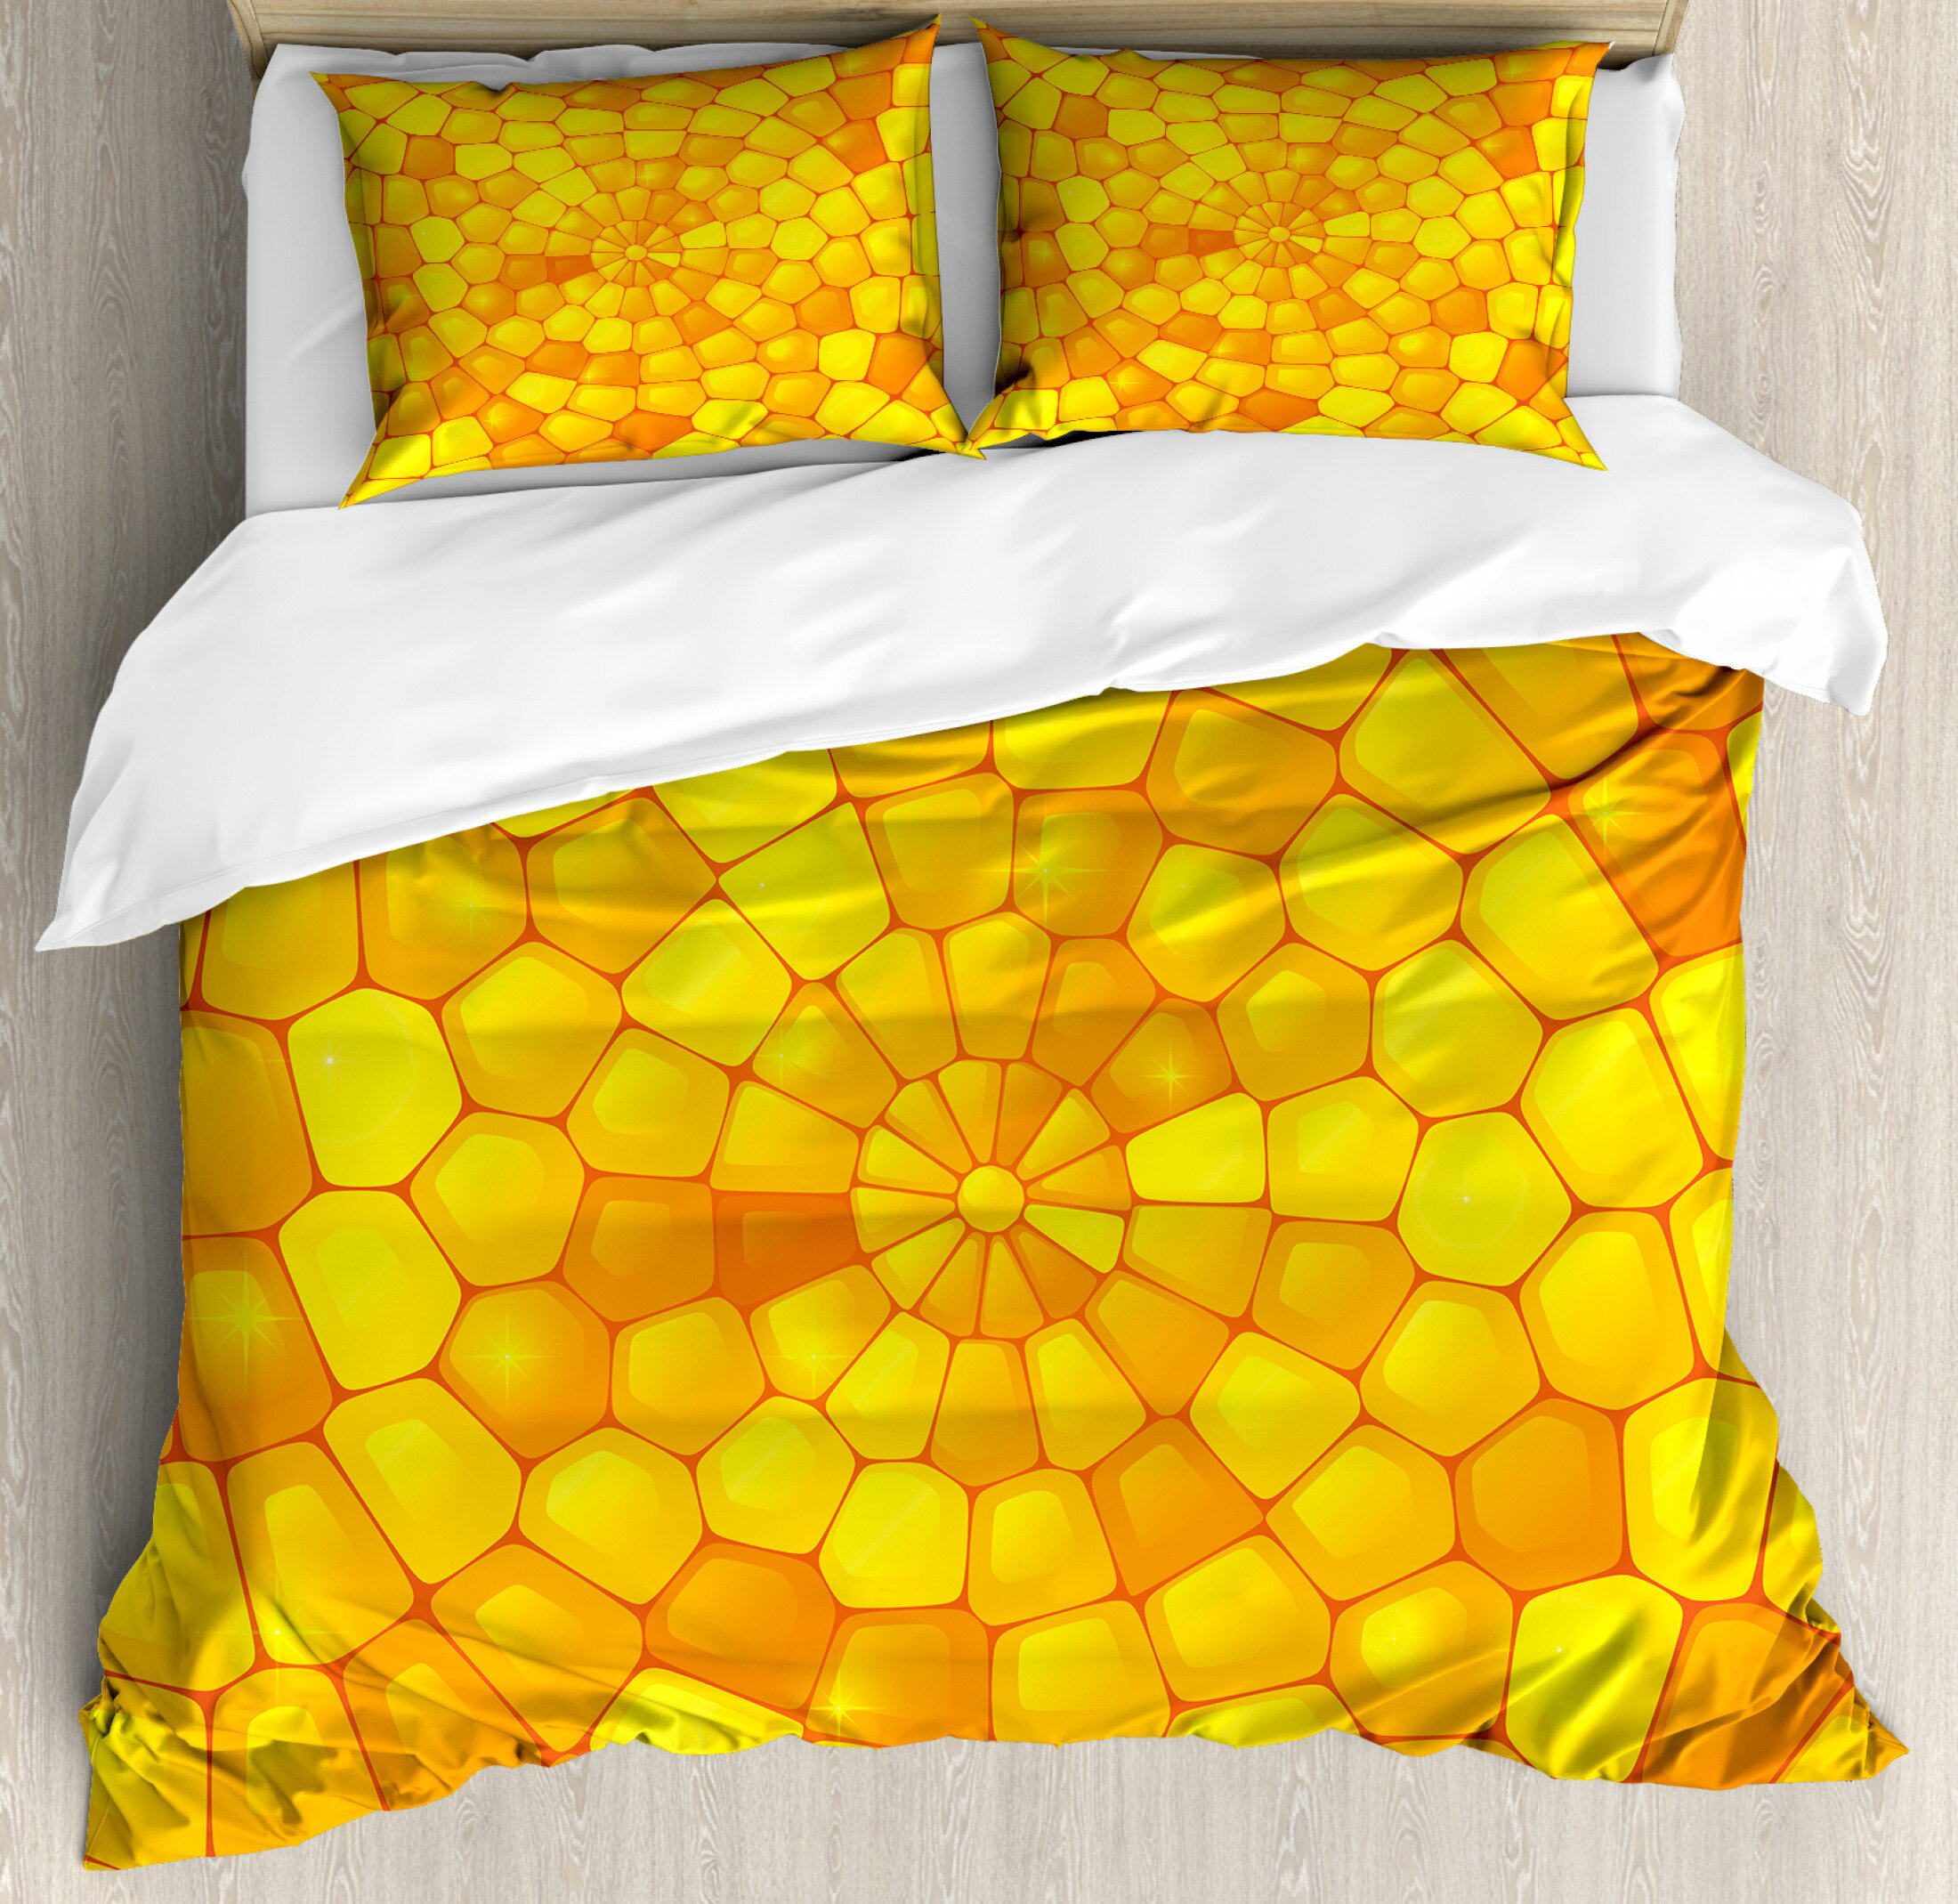 East Urban Home Ambesonne Yellow Duvet Cover Set Abstract Corn